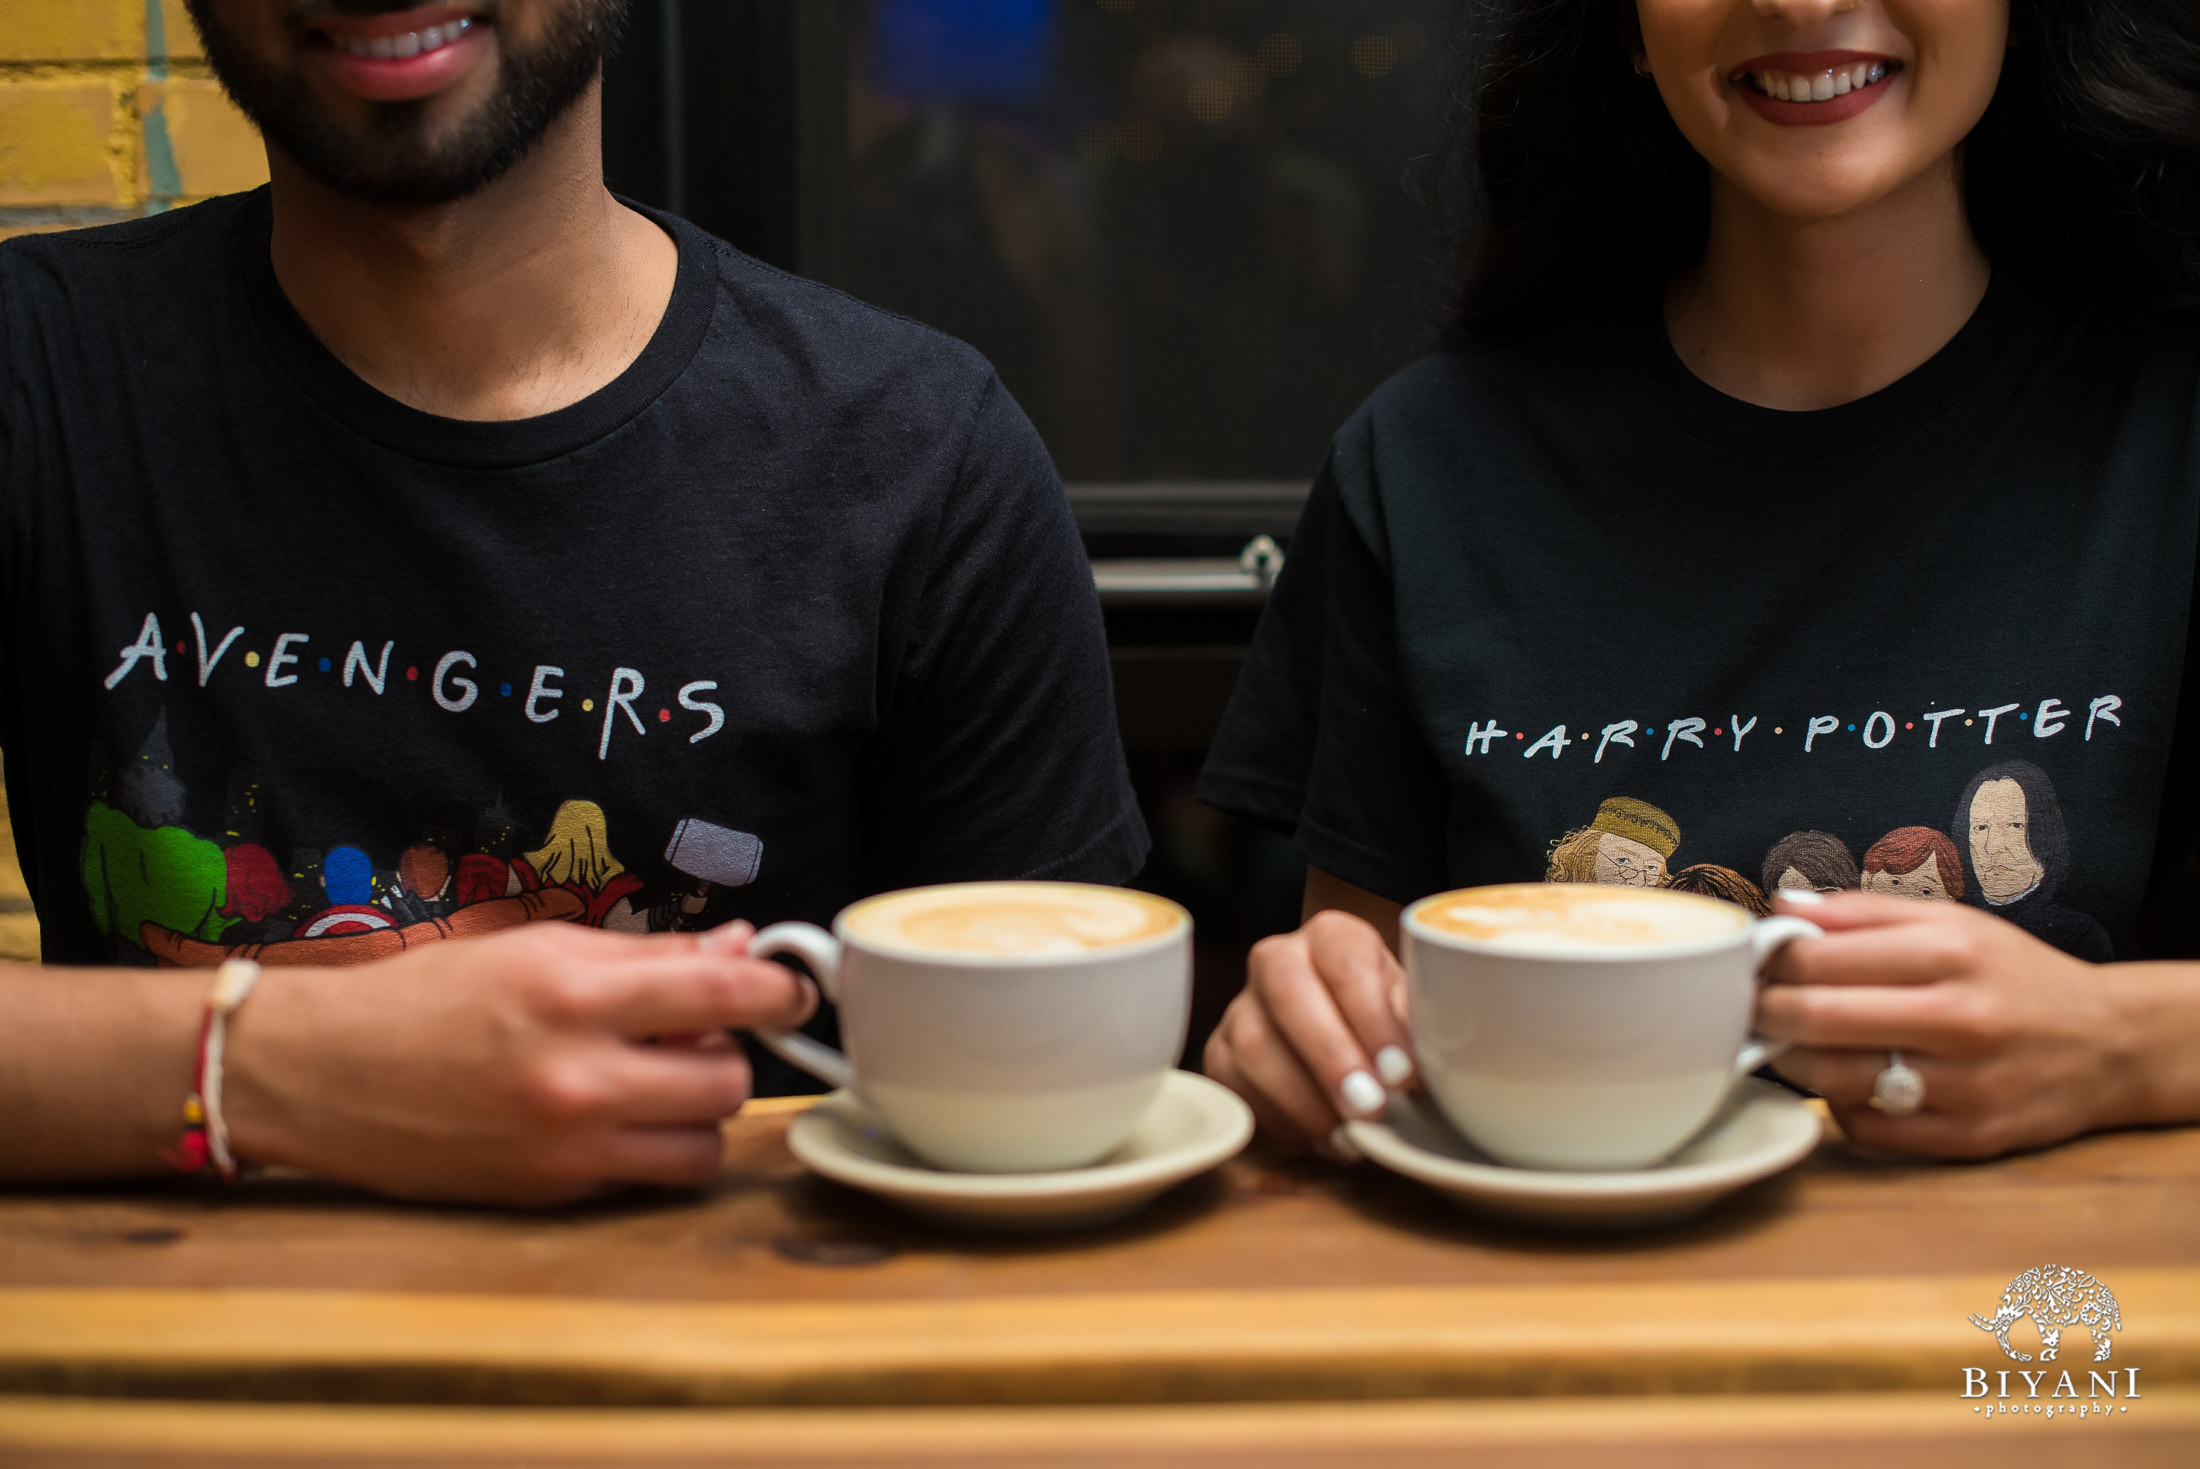 couple enjoying cappuccinos together at a coffee shop wearing Avengers and Harry Potter t-shirts 